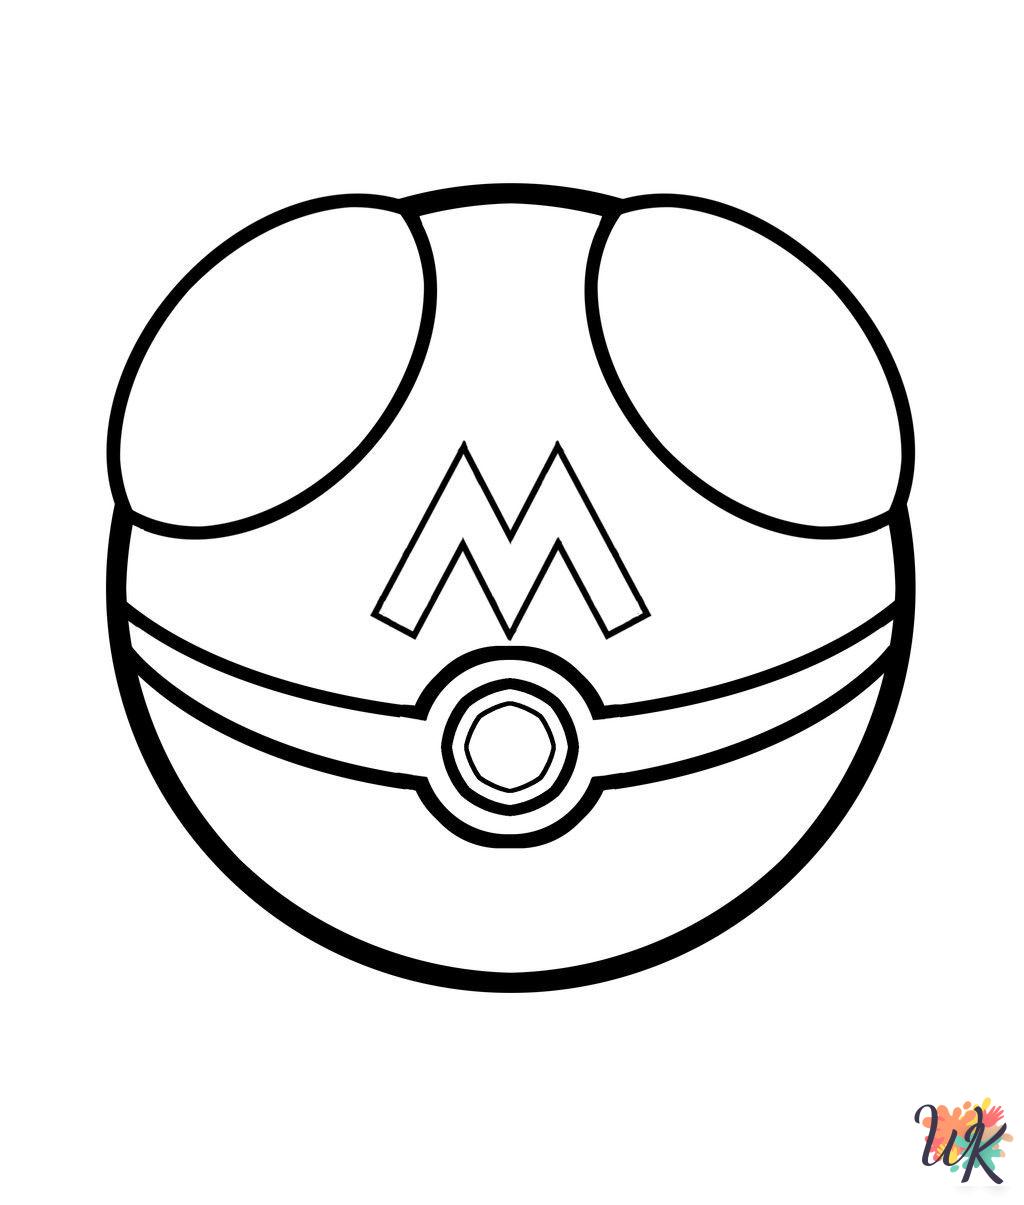 Pokeball coloring pages pdf